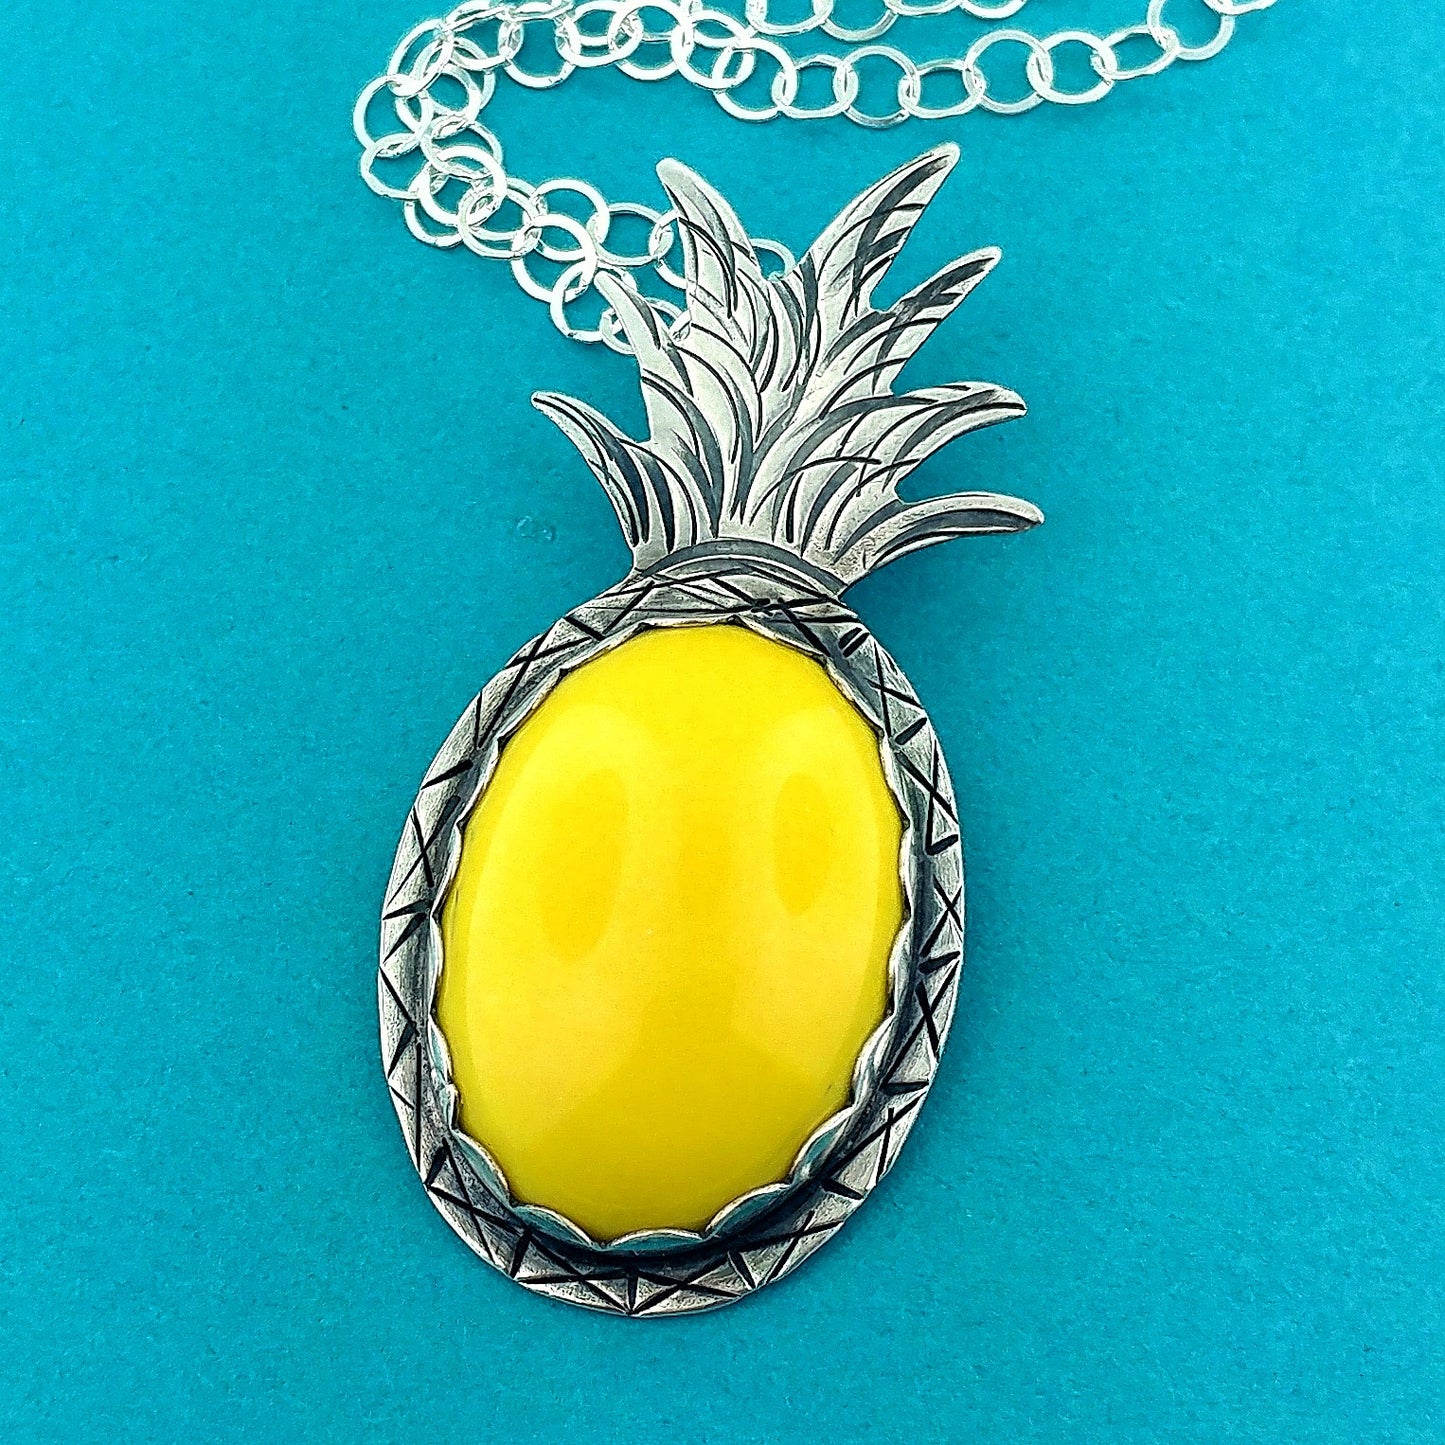 Pineapple Necklace - Yellow